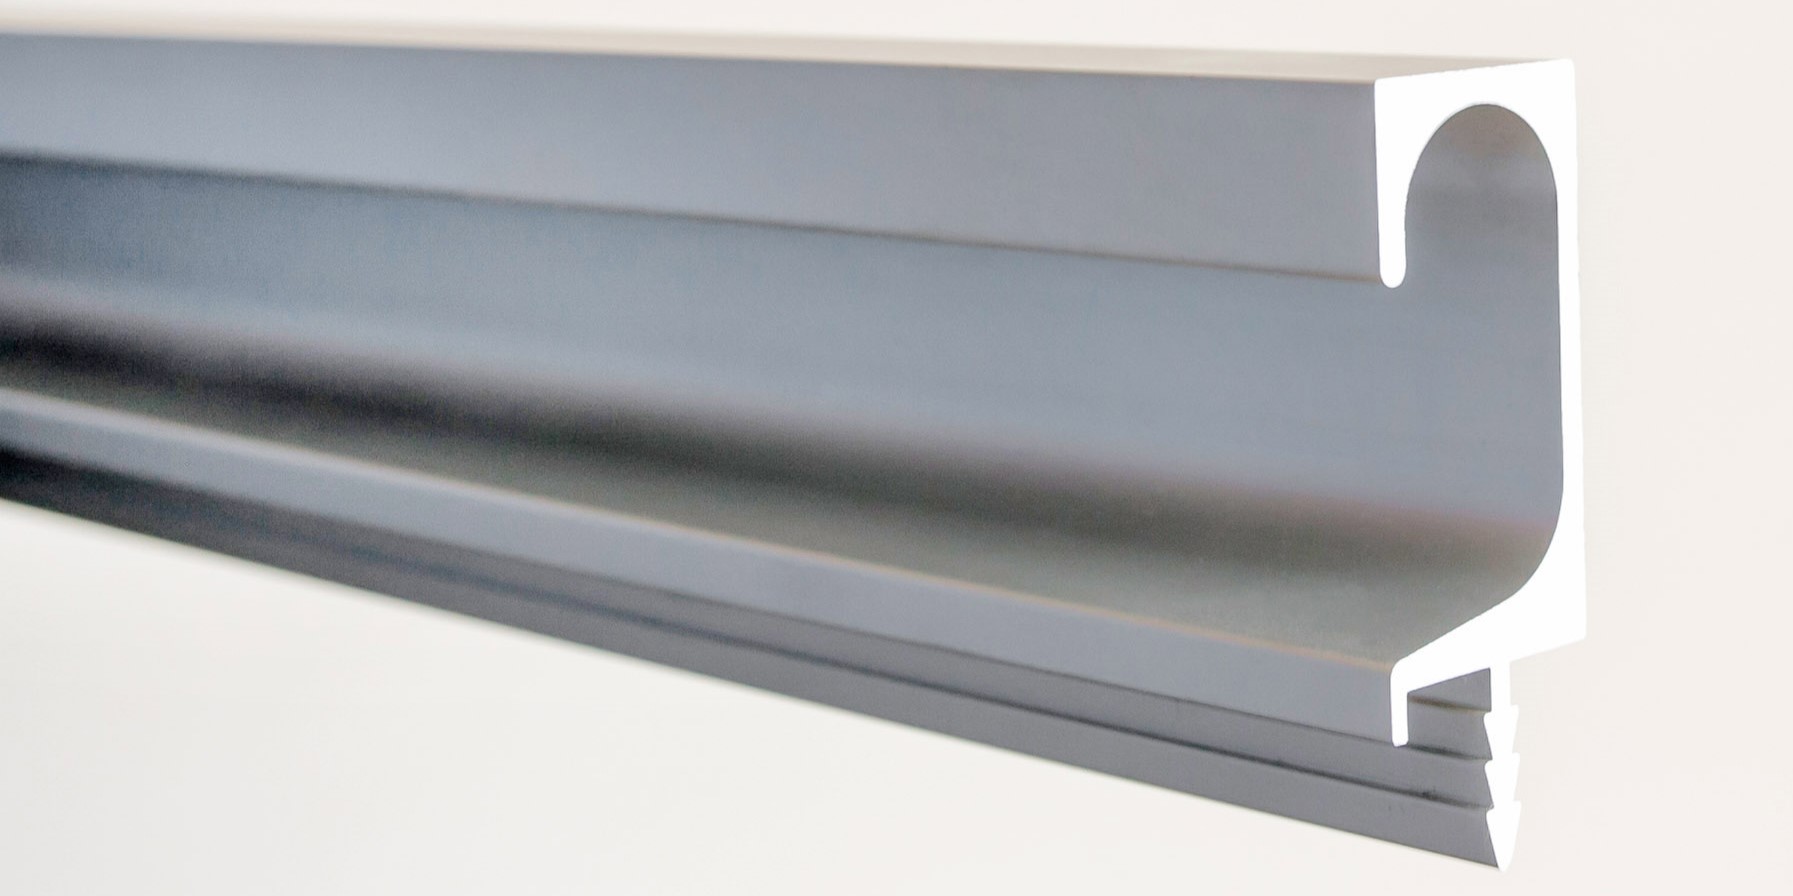 Aluminum Extruded Handles - Quality Kitchen Cabinet Doors since 2005